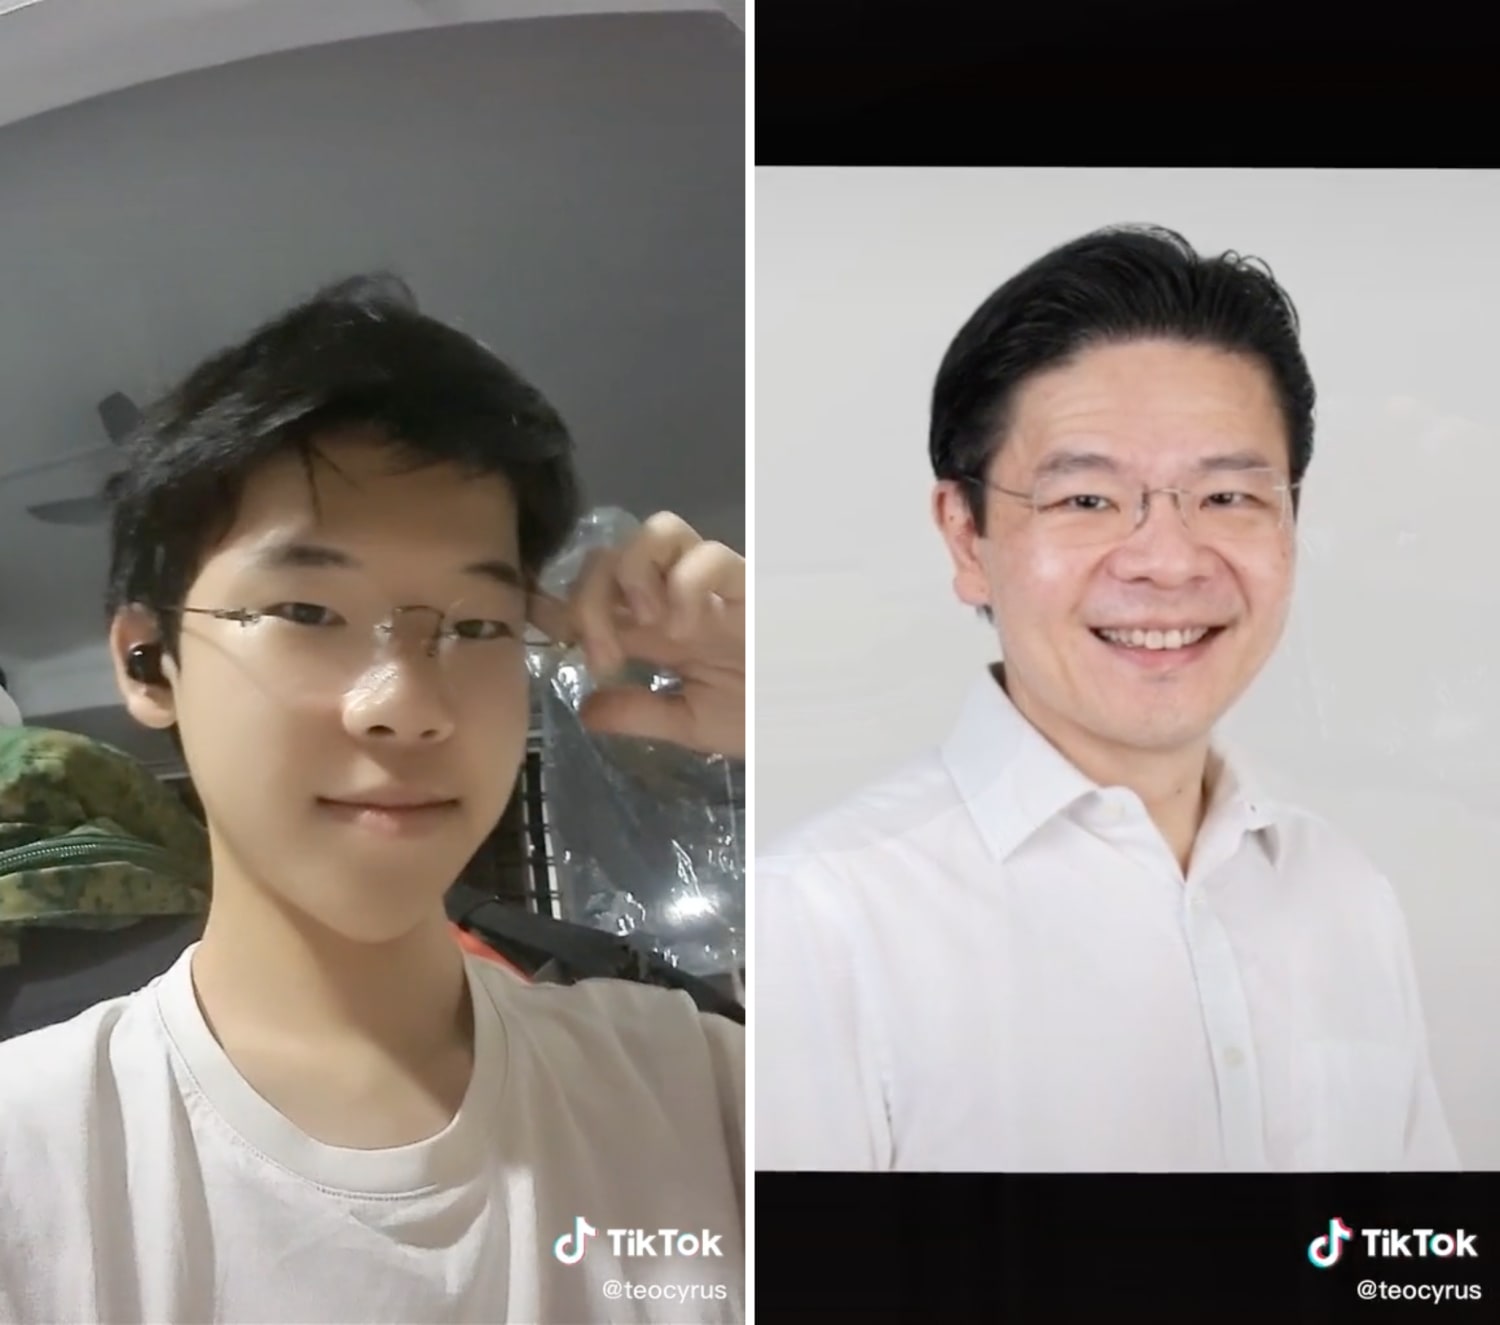 A Singaporean youth known as Cyrus on TikTok has been using the video-sharing platform's shapeshifting feature to morph himself into Deputy Prime Minister Lawrence Wong, much to the amusement of viewers.